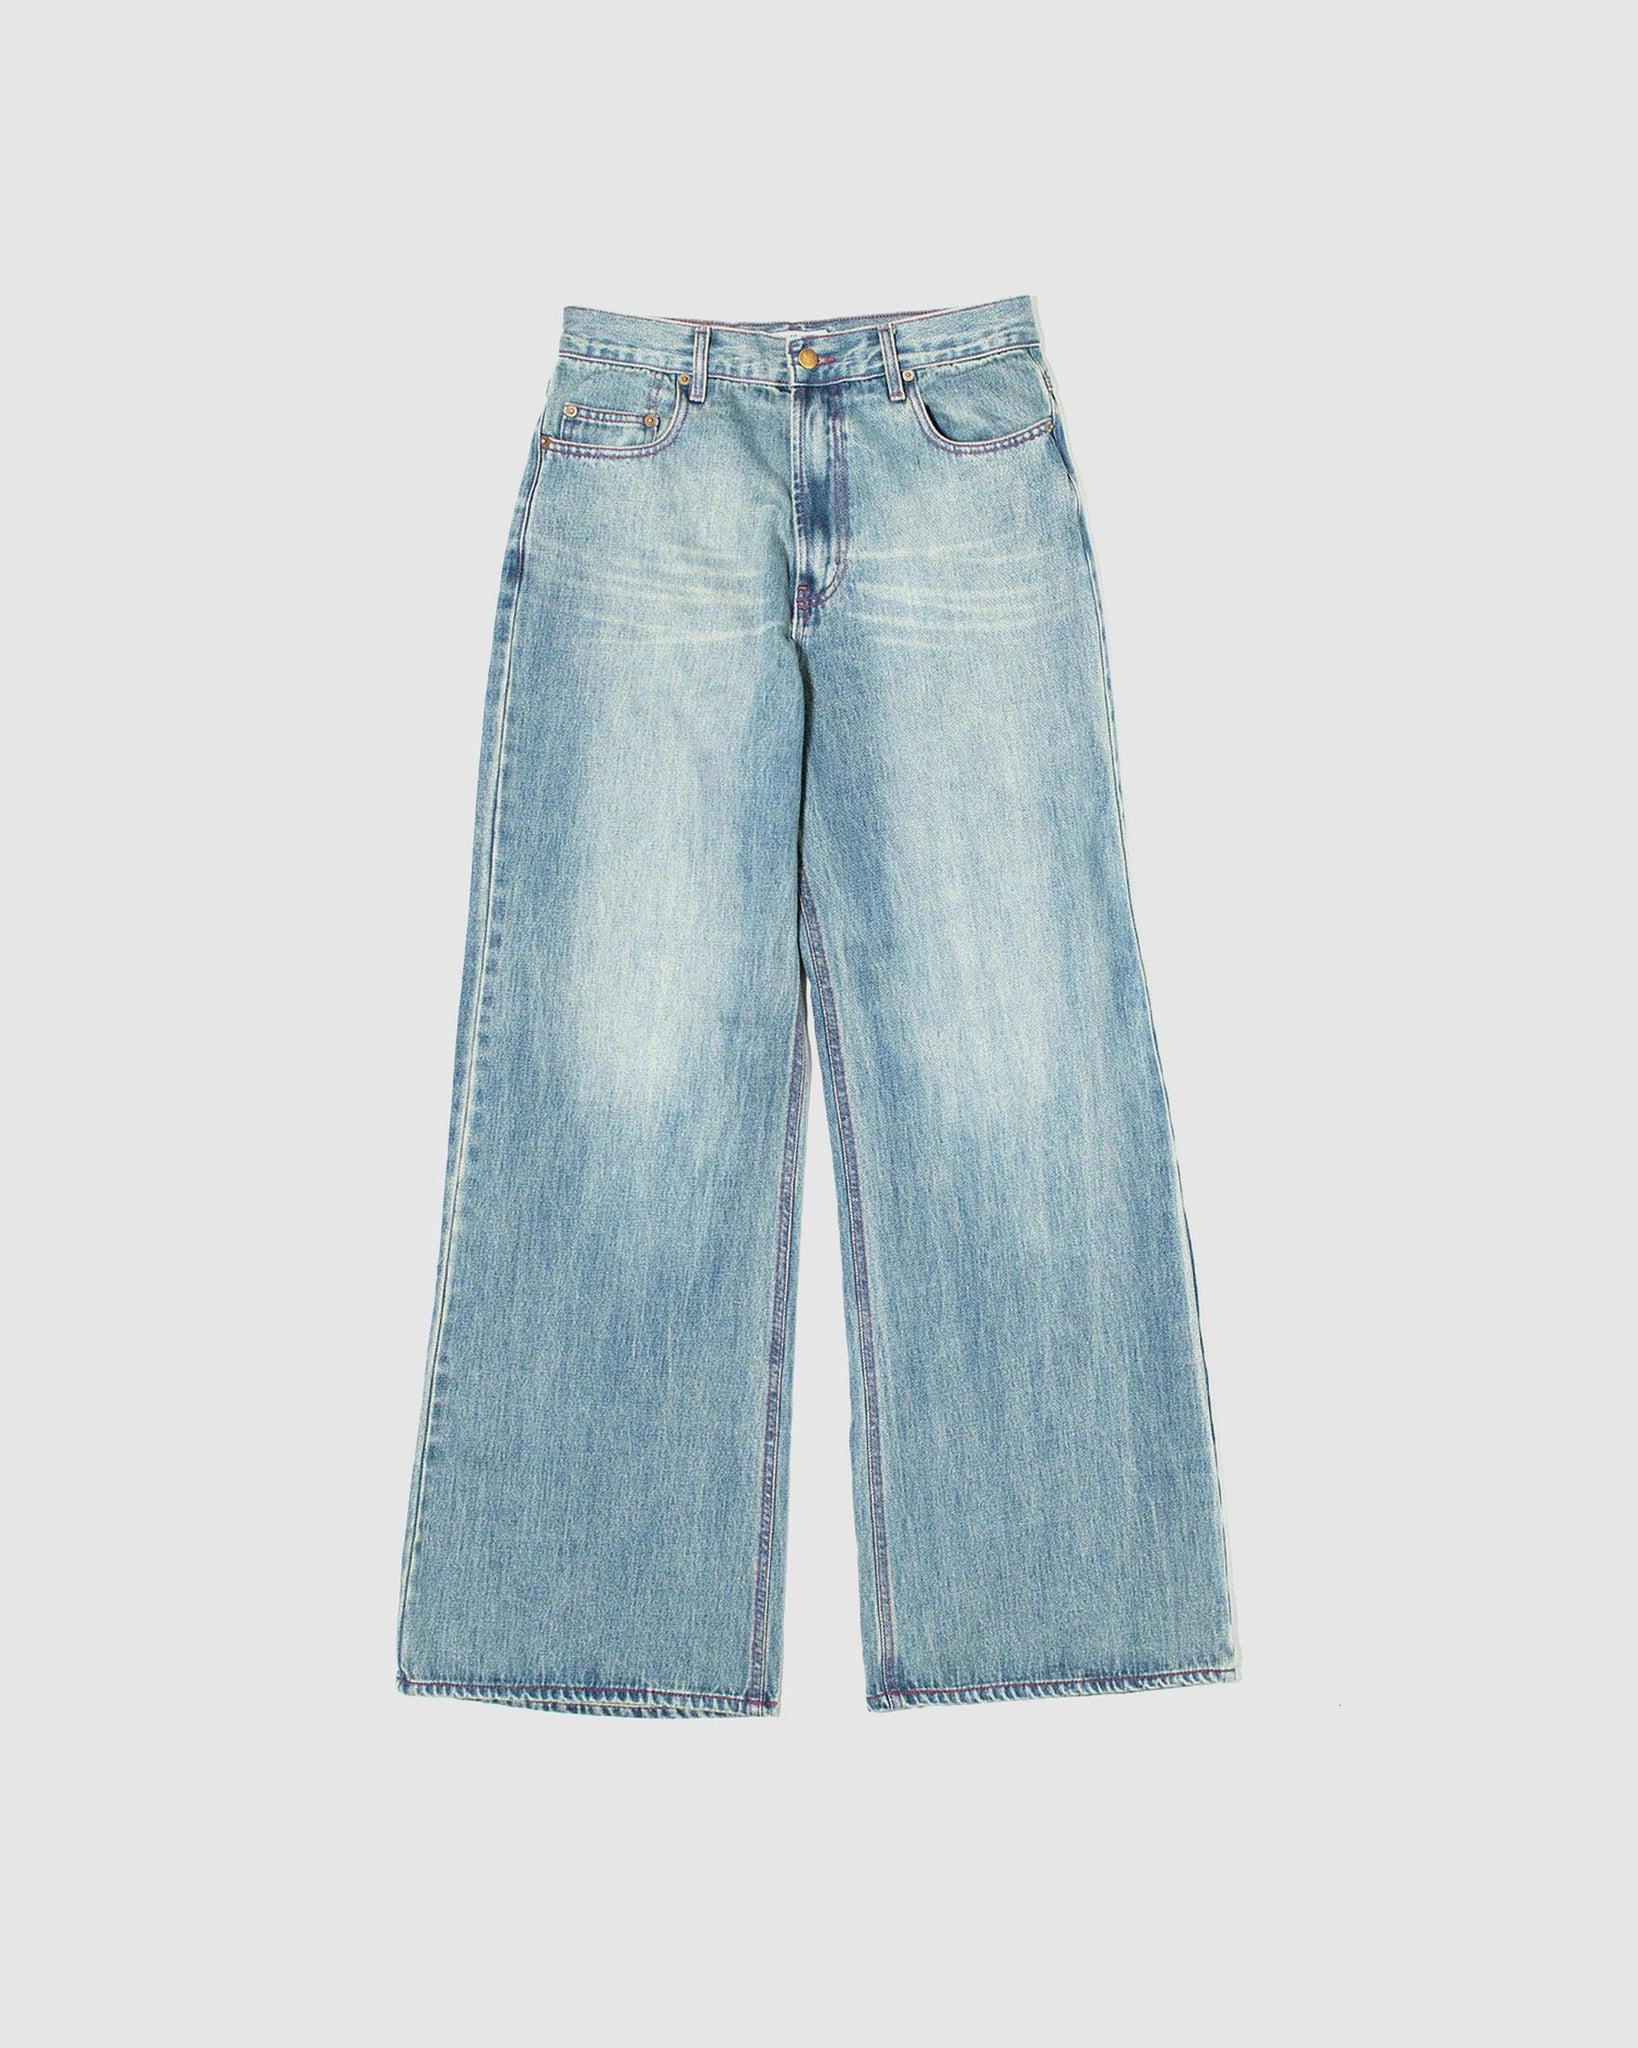 PSEUSHI Baggy Jeans Vintage Wash – Chinatown Country Club